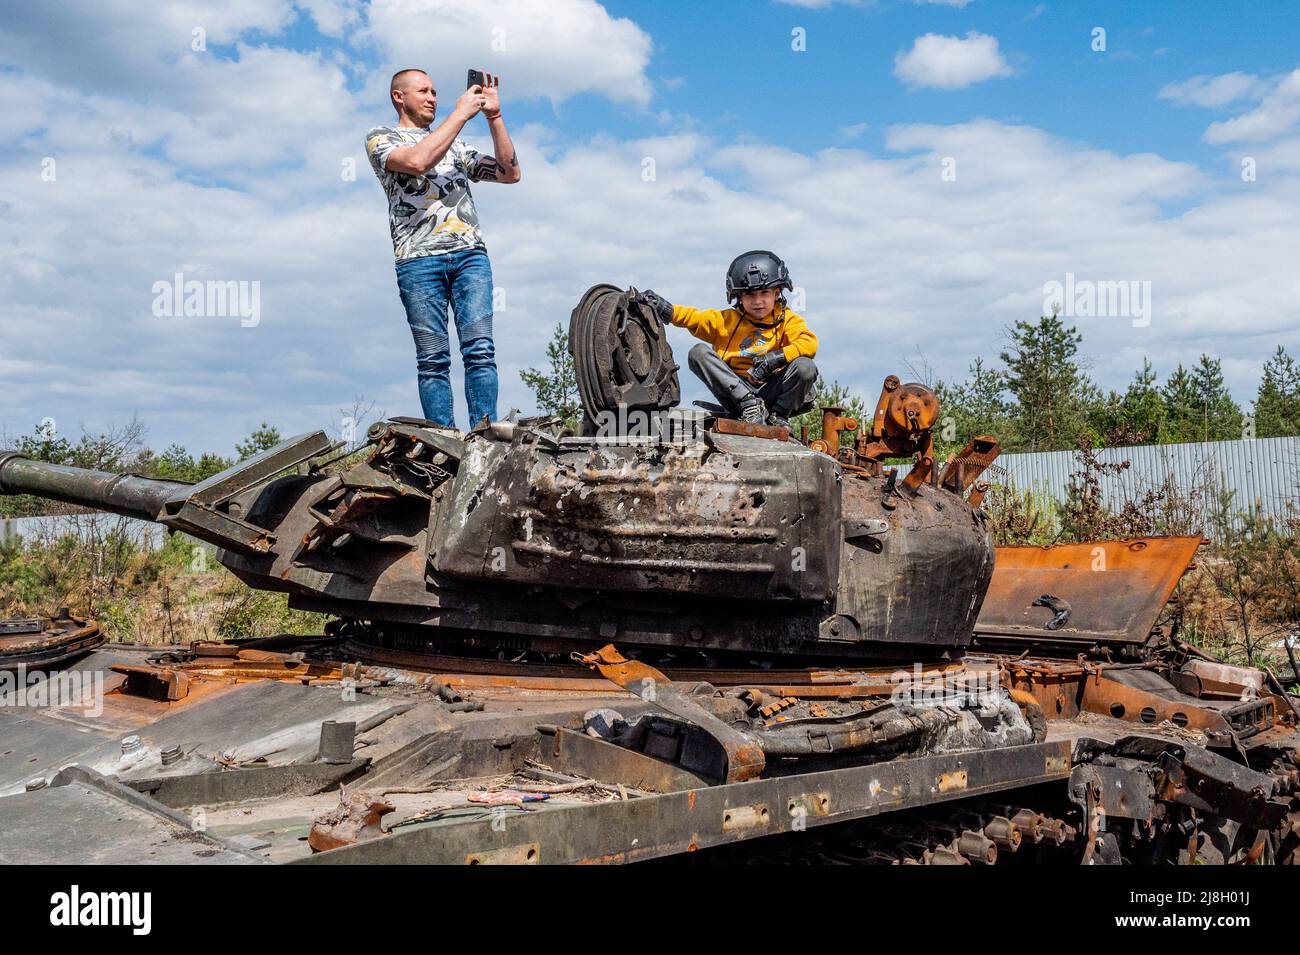 Nalyvaikivka, Ukraine. 15th May, 2022. A man taking a photograph and a child sitting on a destroyed Russian tank in Nalyvaikivka. Credit: SOPA Images Limited/Alamy Live News Stock Photo